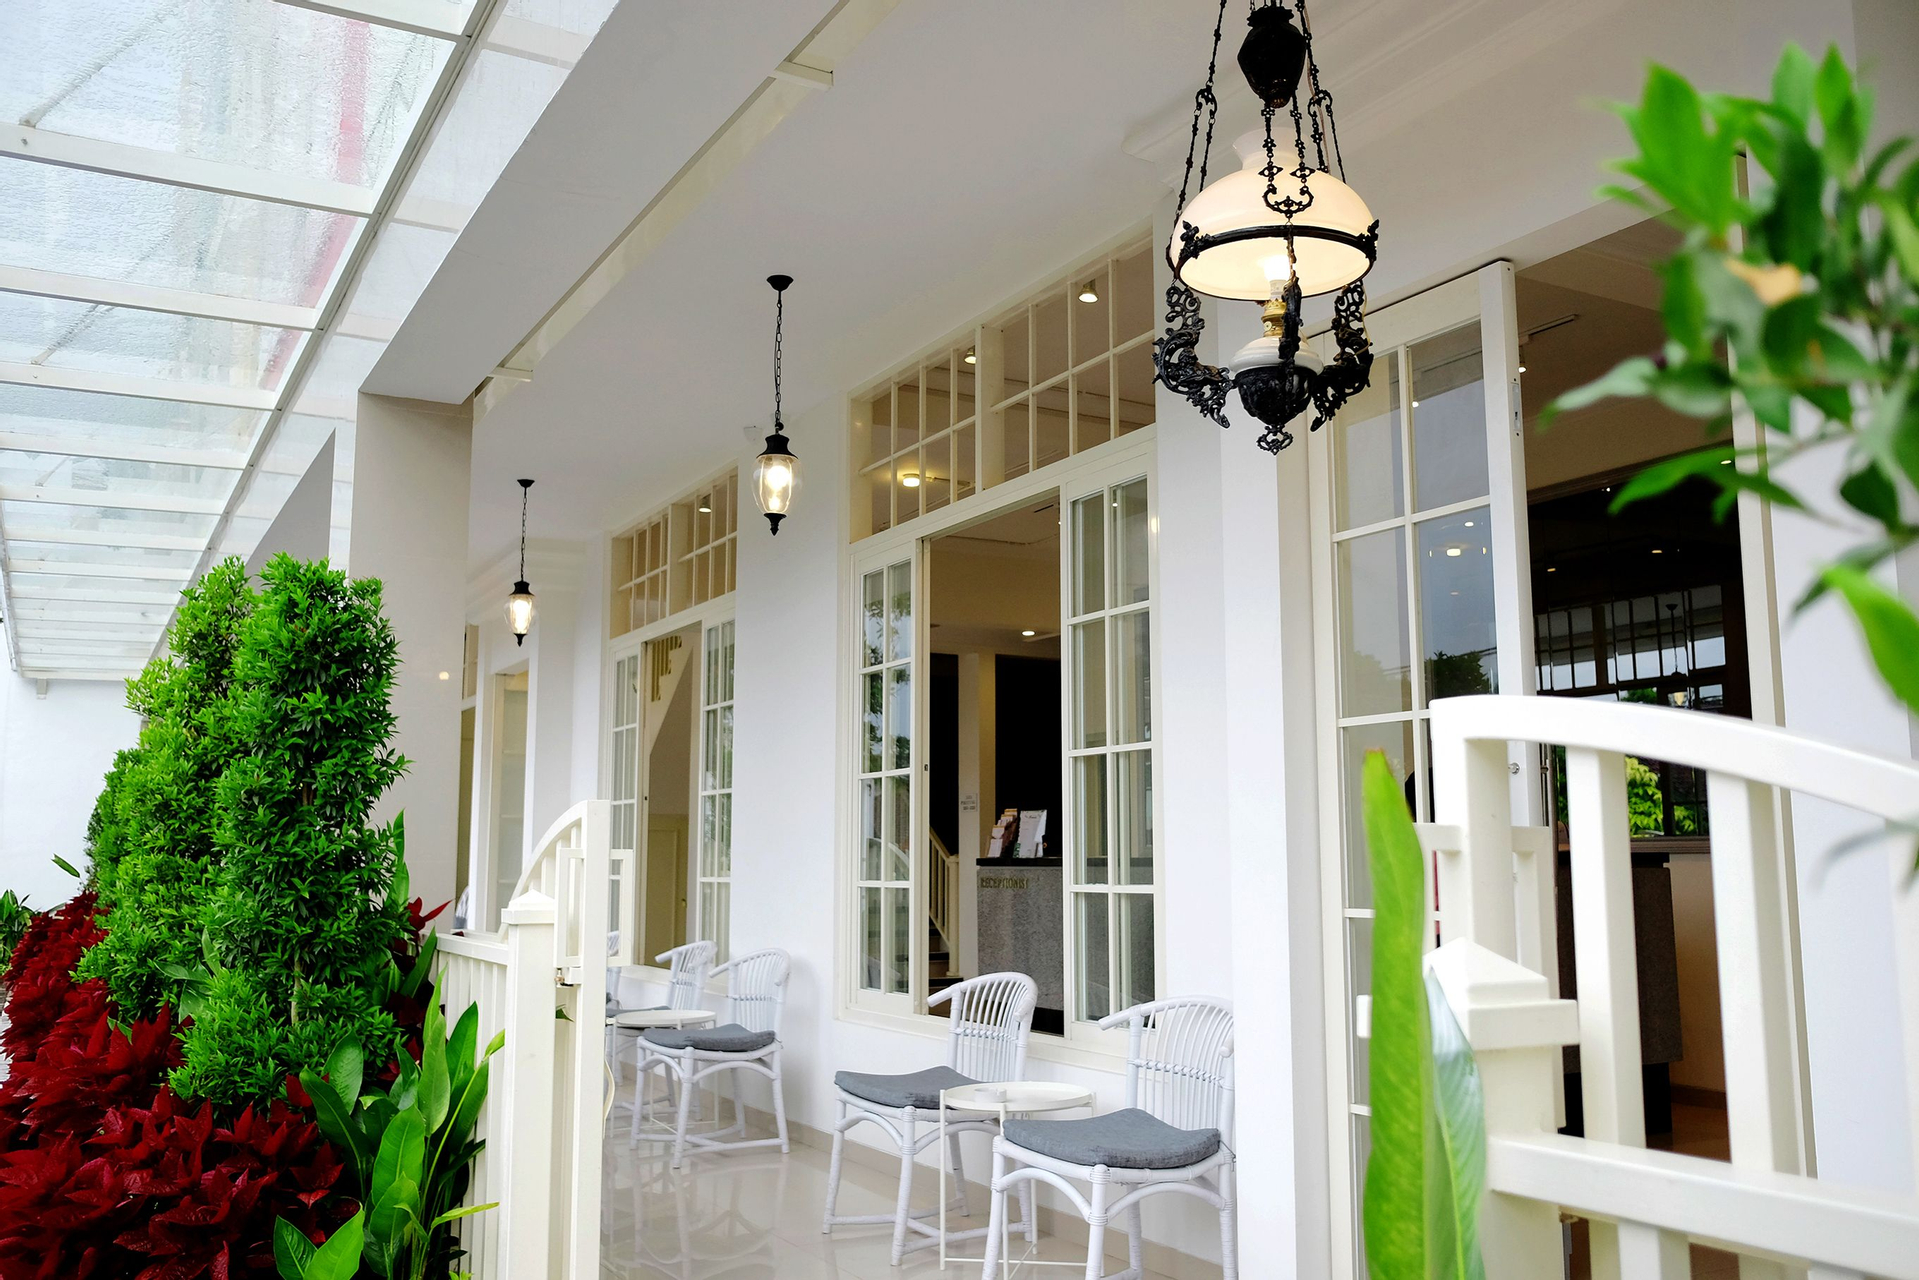 Victoria Boutique Residence, Malang